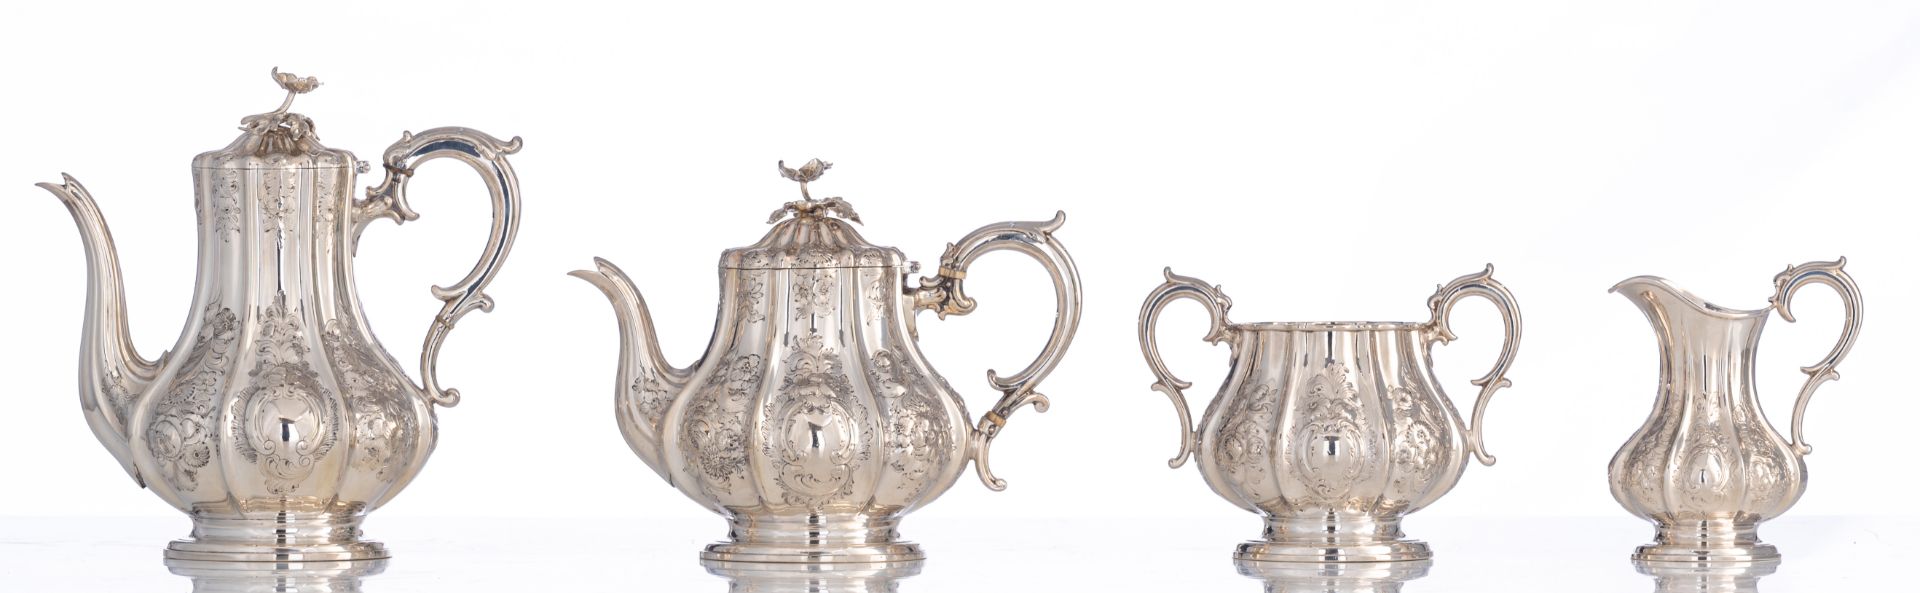 A silver plate Rococo Revival four-part coffee and tea set, Elkington & Cø (1842 - 1864), H 14,5 - 2 - Image 10 of 24